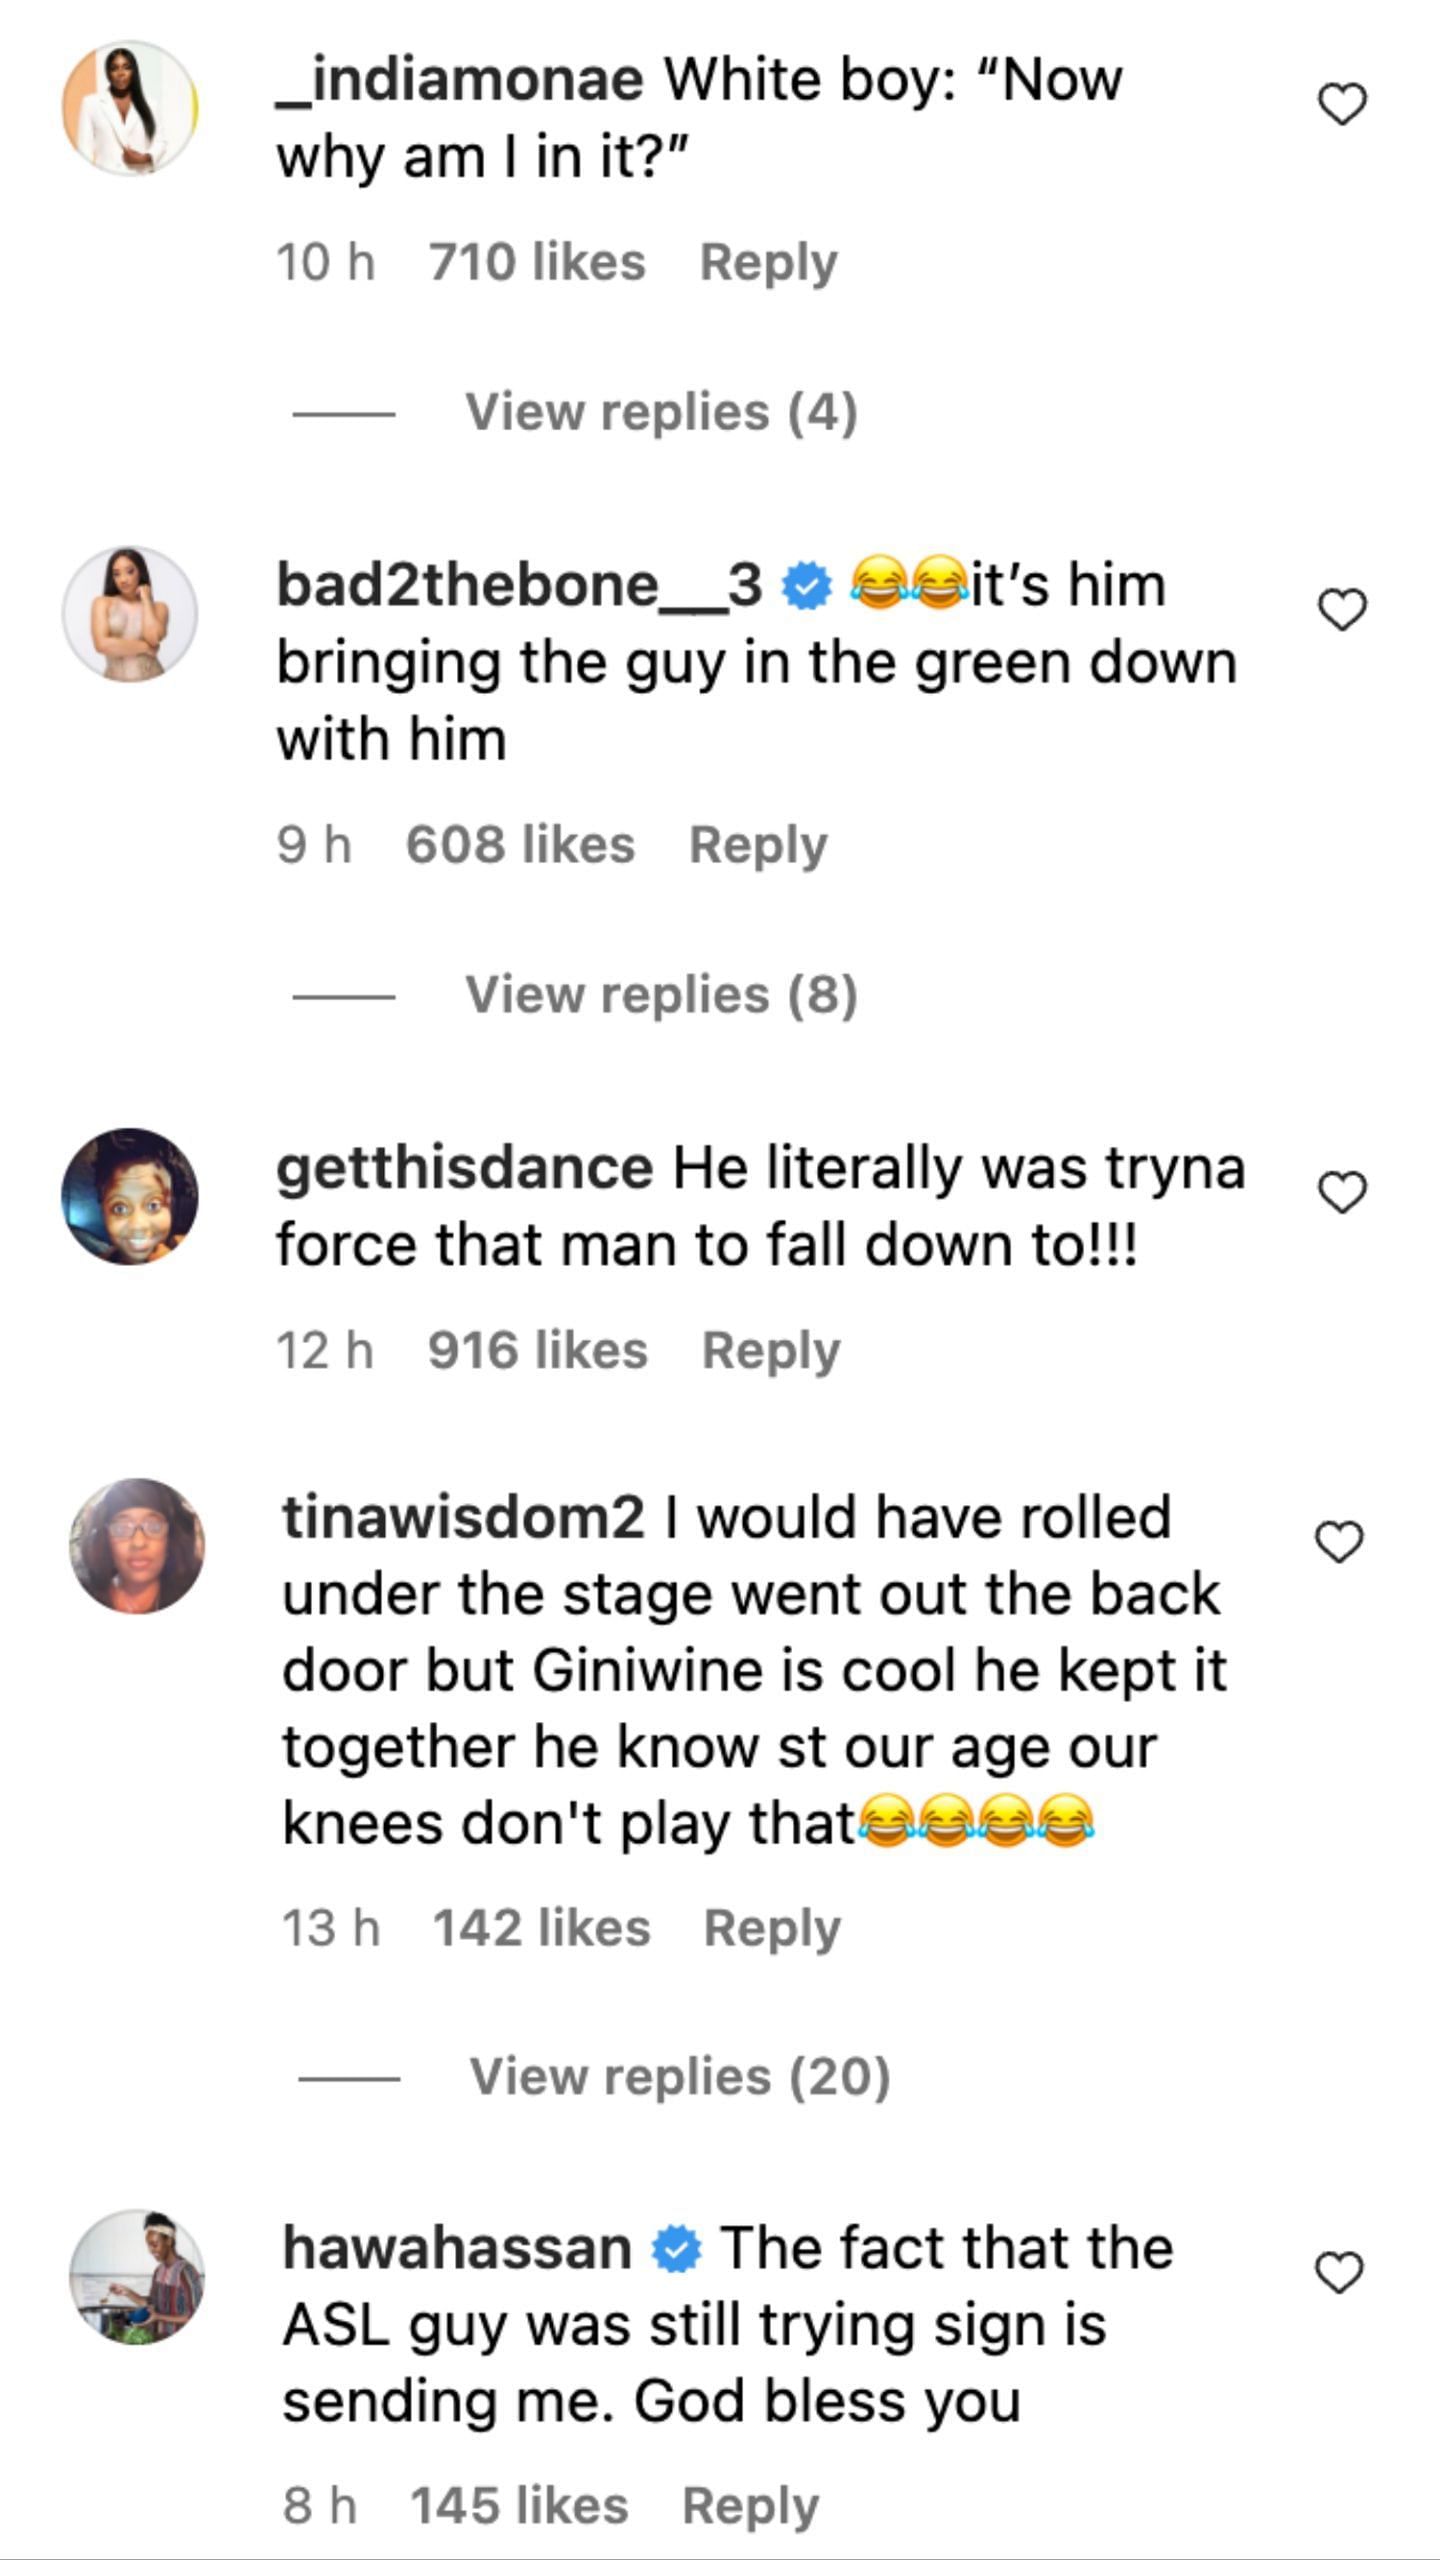 Social media users share hilarious reactions as the singer tumbles while performing at the Lovers and Friends festival in Los Angeles: Reactions explored (Image via Instagram)